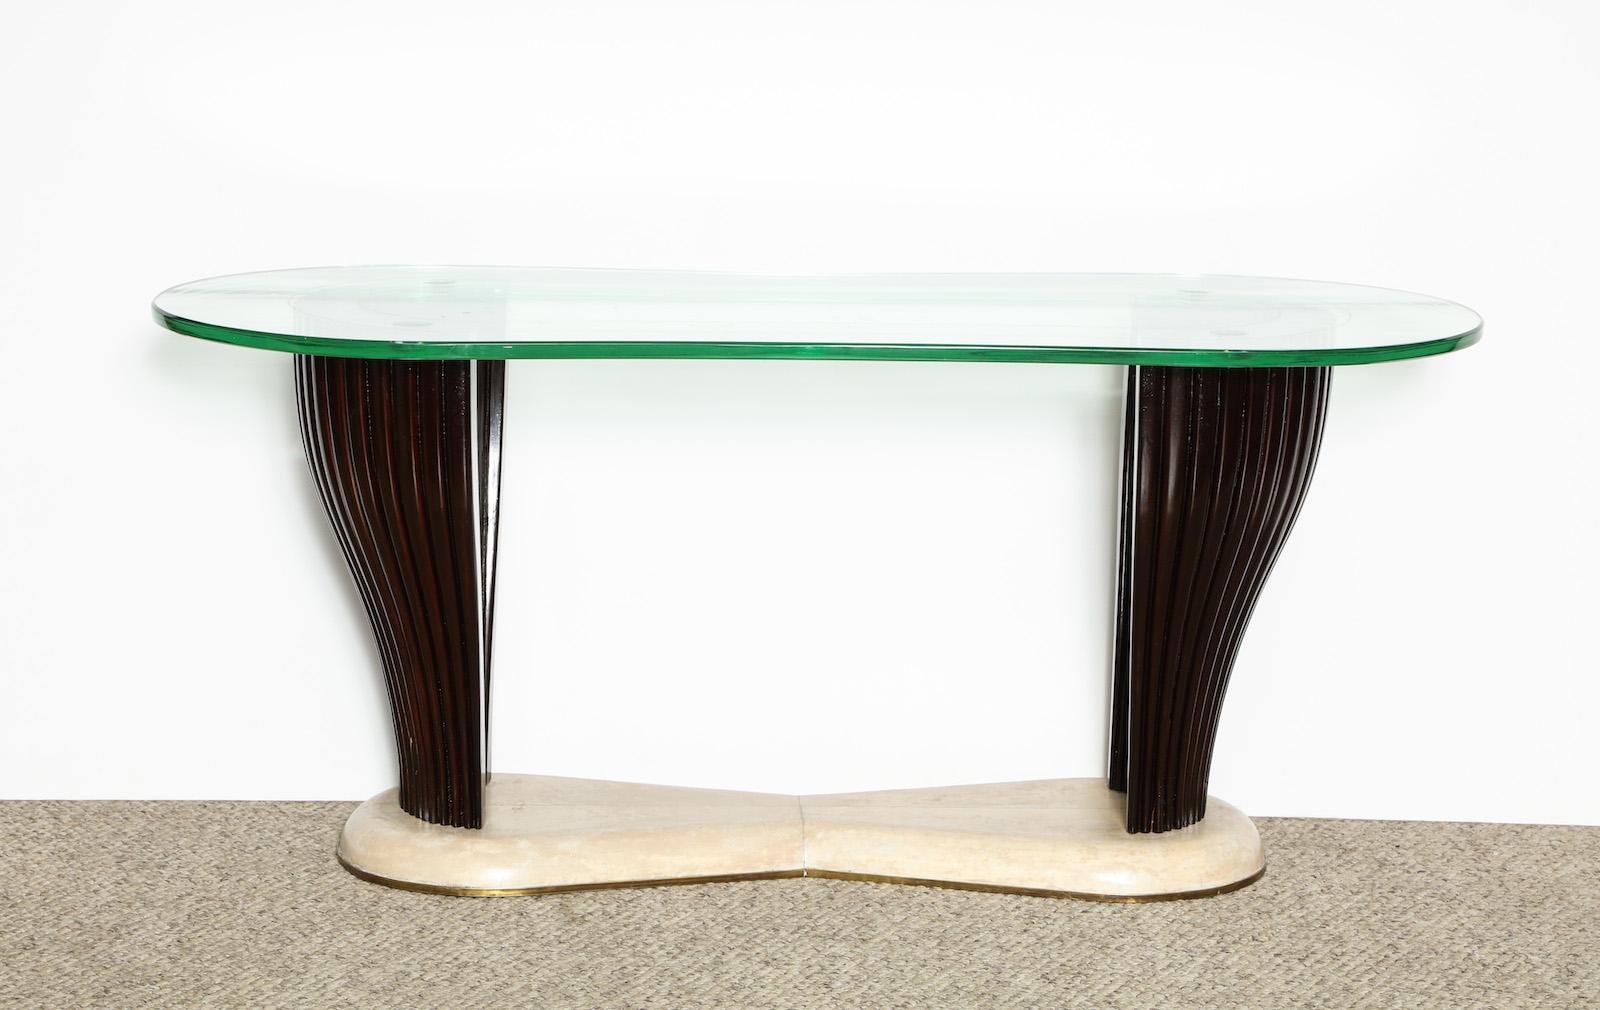 Curved and ribbed wood base with parchment-covered foot. Irregular glass top with etched surface.